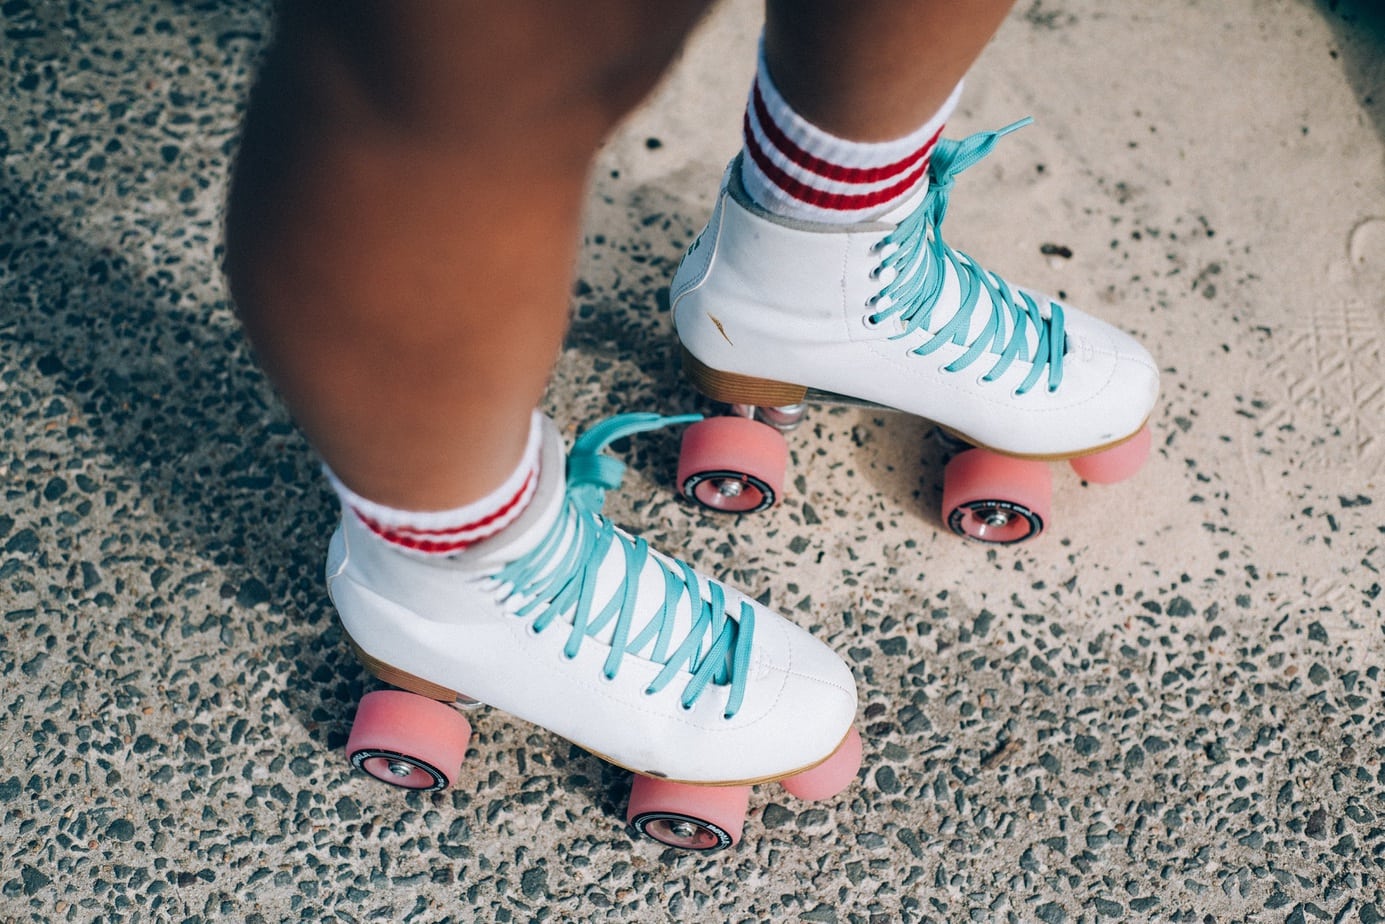 Roller skating – why should you do it?